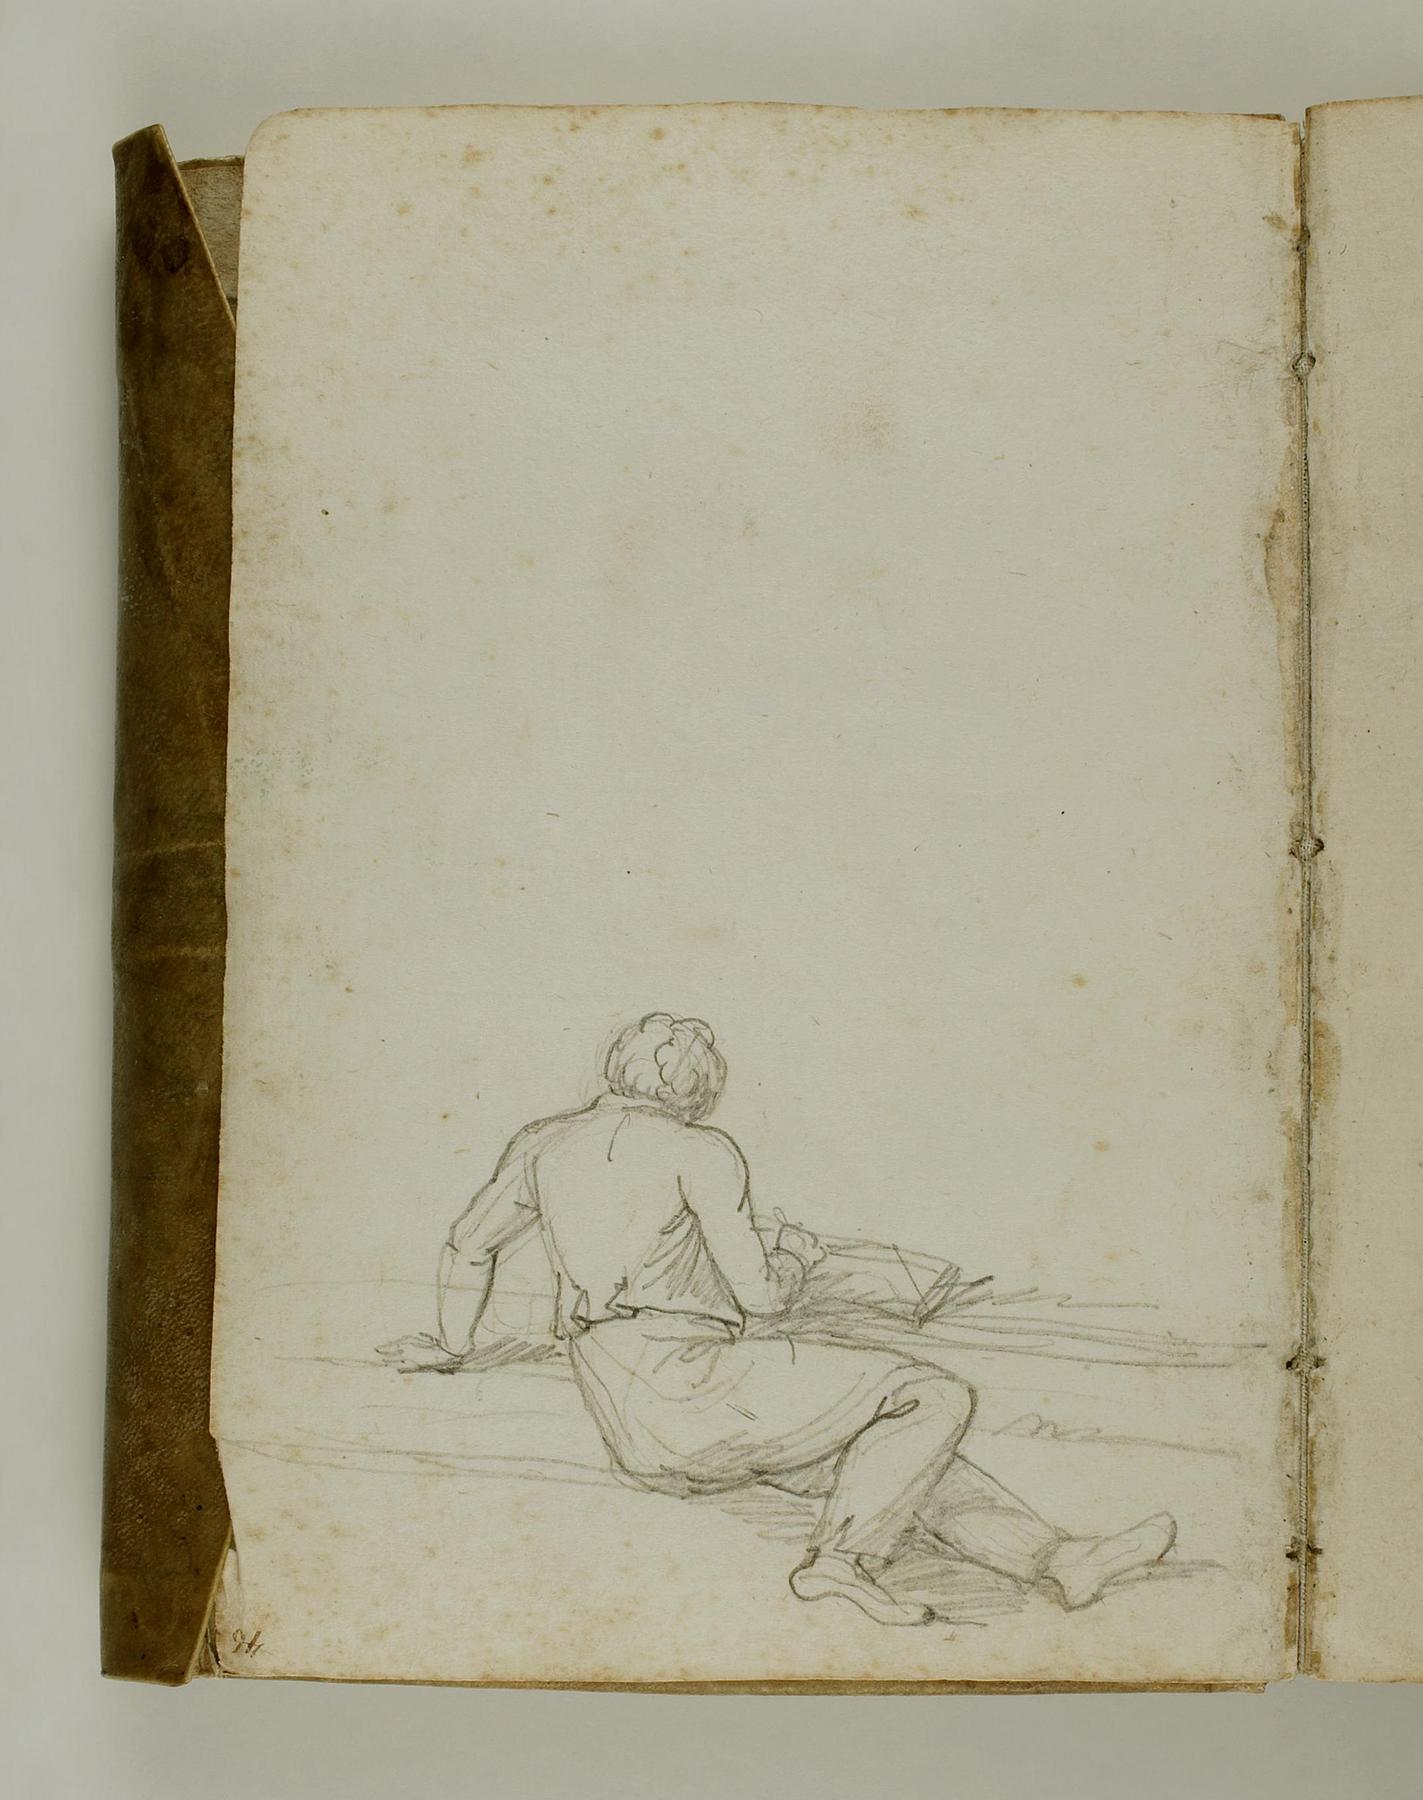 Artist reclining and drawing, C562,46r